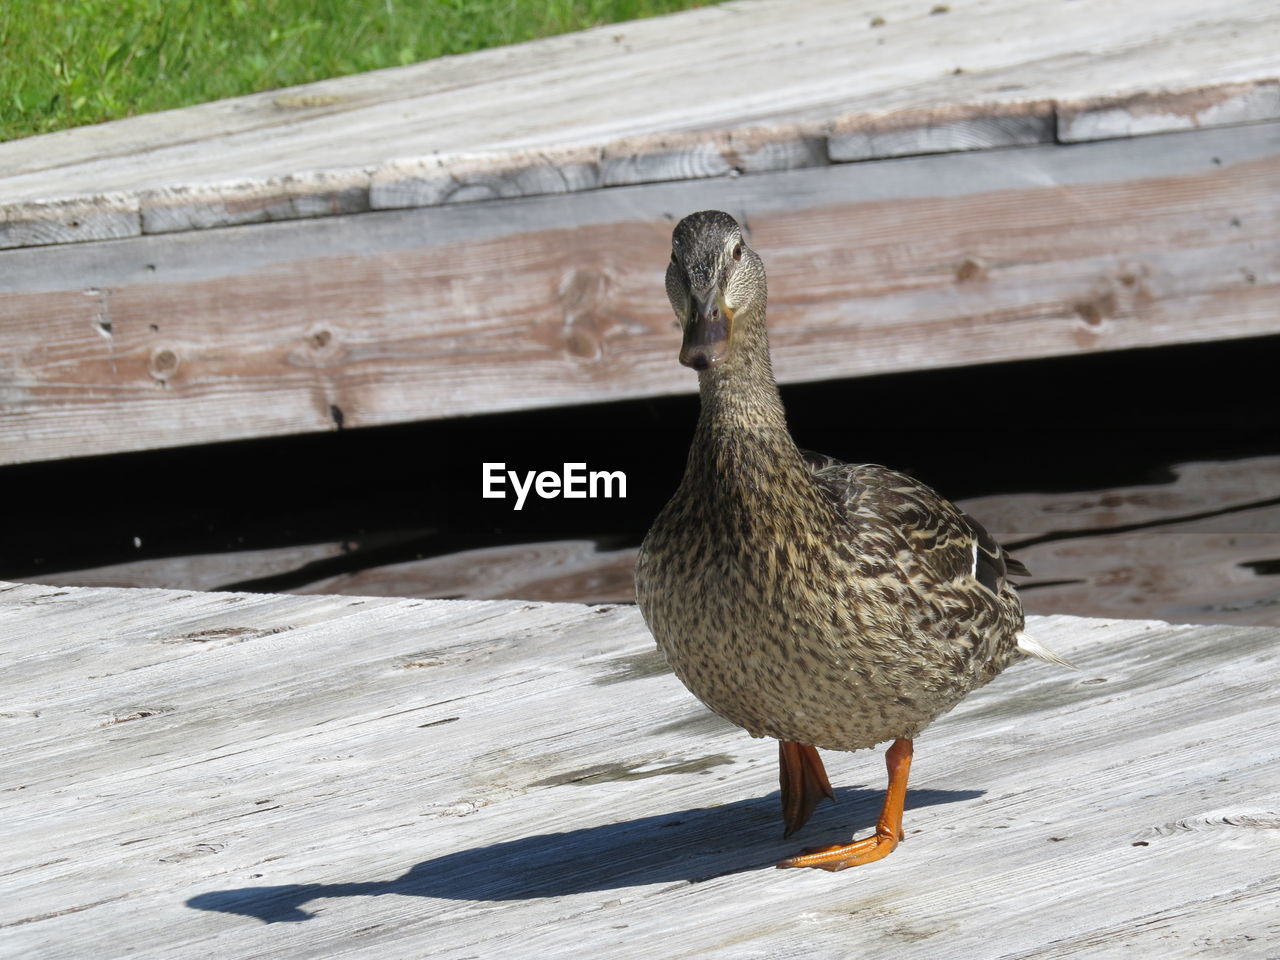 Duck on dock in upstate new york